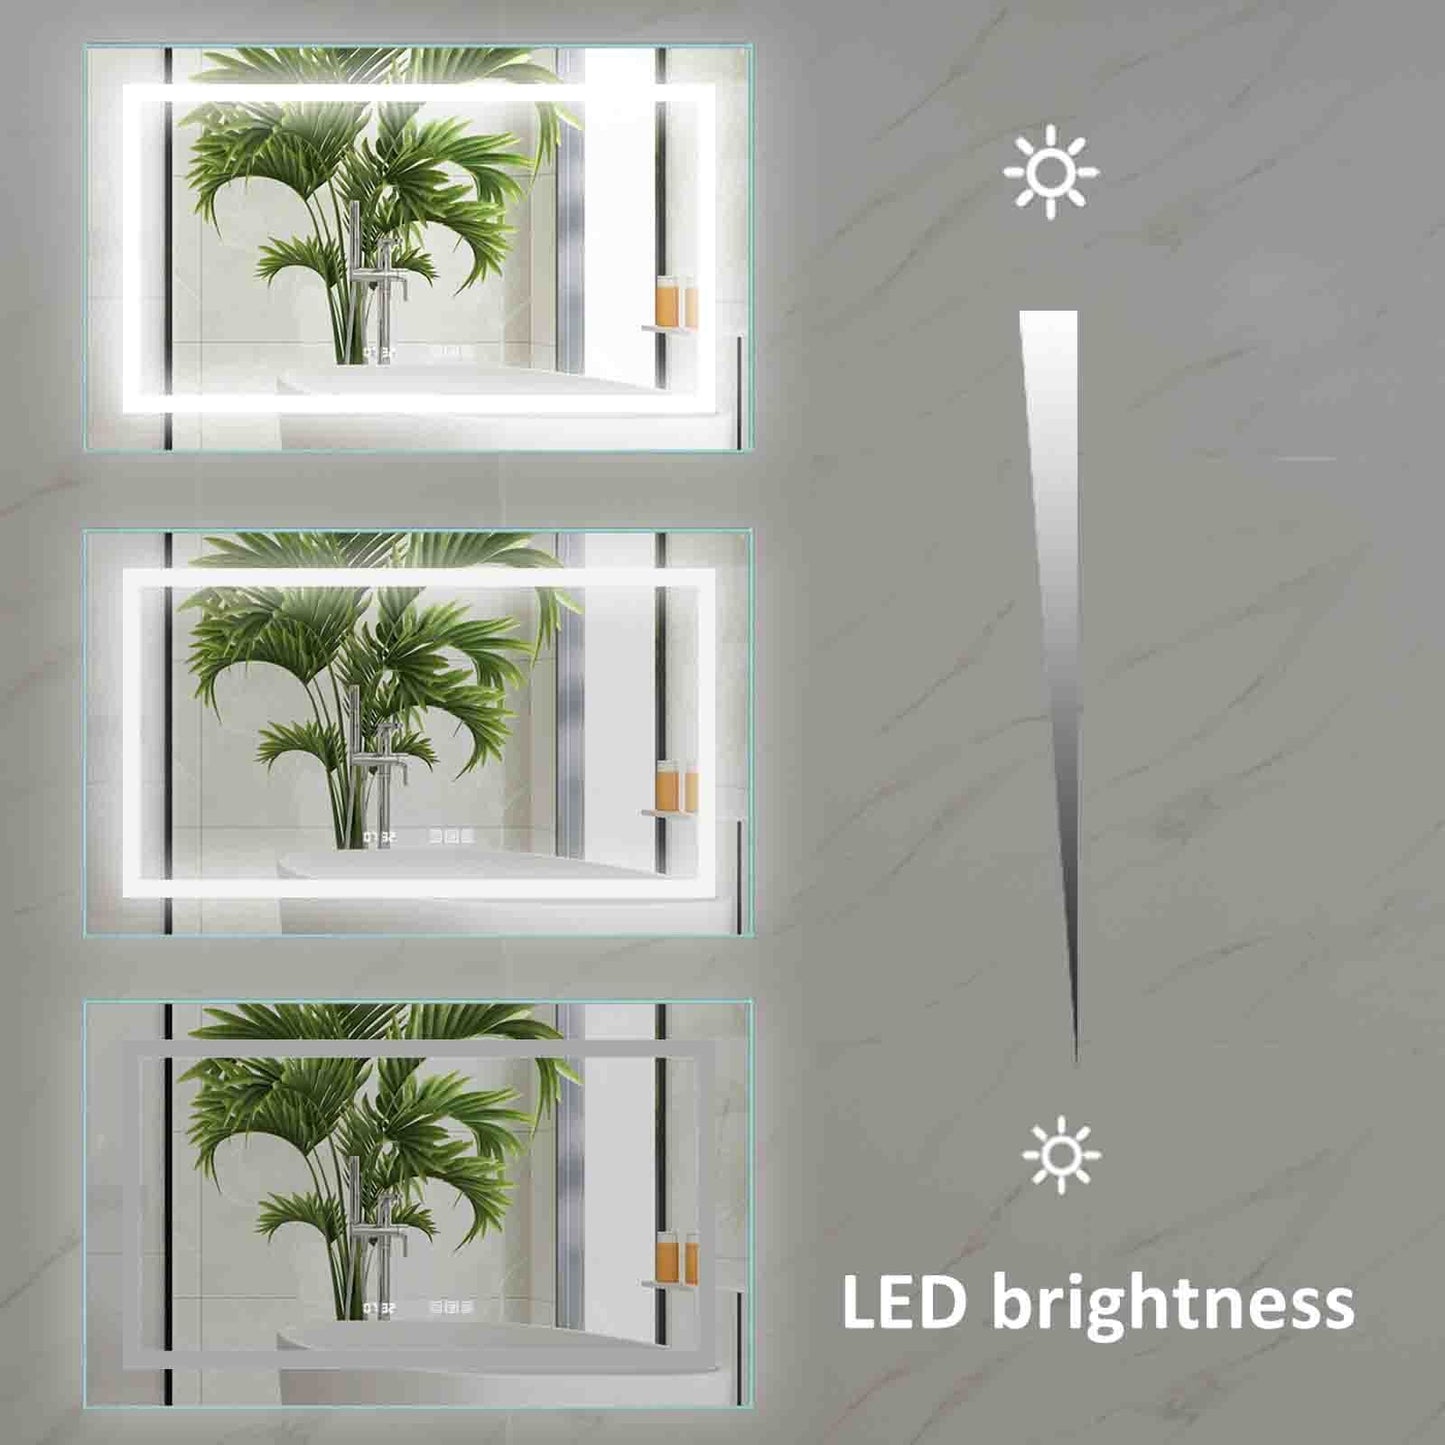 LED Bathroom Vanity Mirror, 40 x 24 inch, Anti Fog, Night Light, Time,Temperature,Dimmable,Color Temper 3000K-6400K,90+ CRI,Horizontal Wall Mounted Only